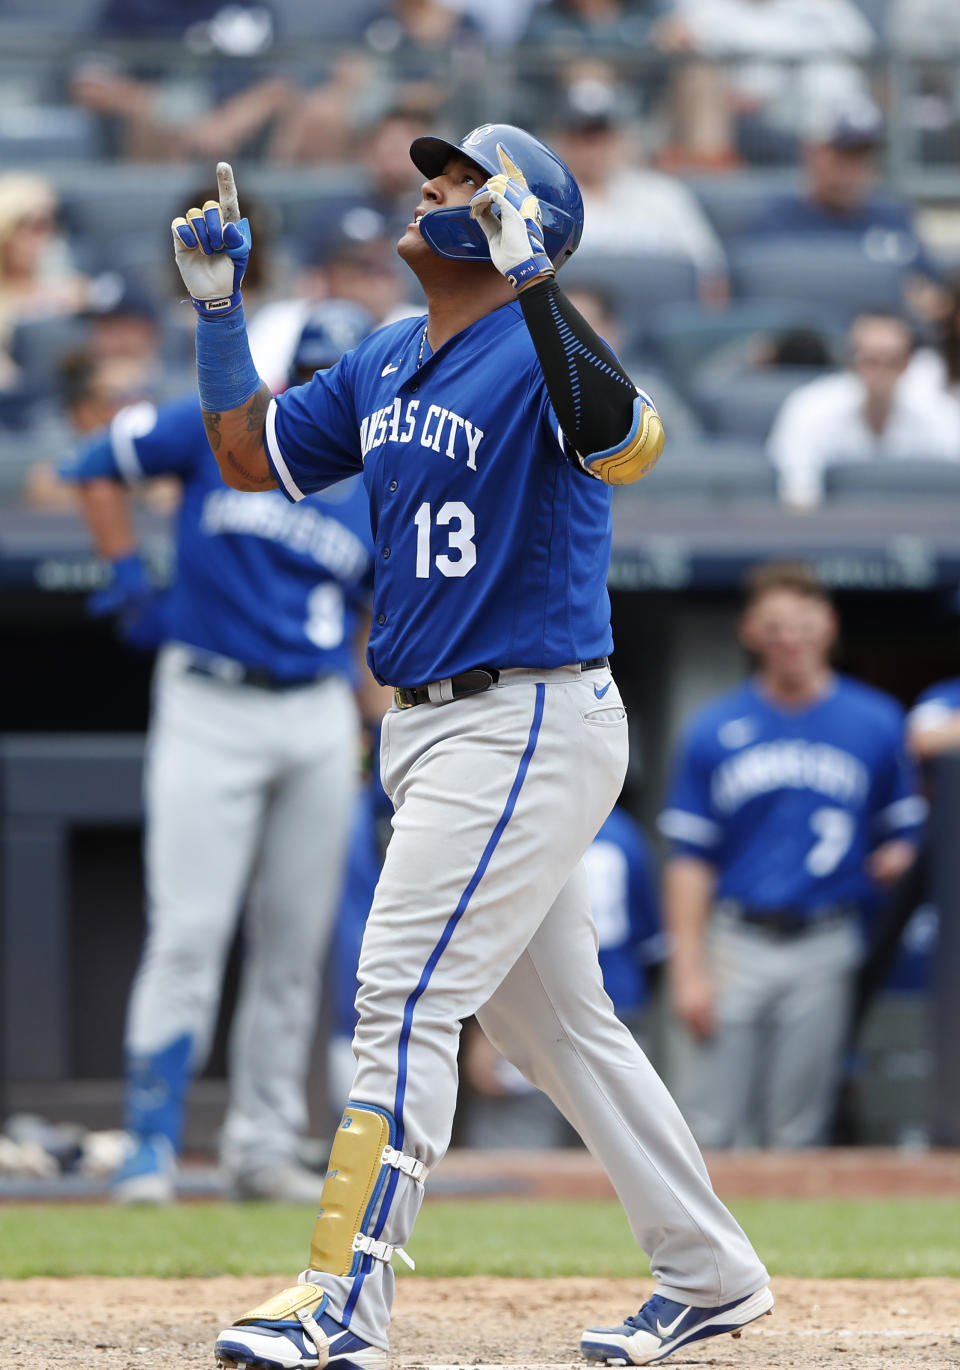 Kansas City Royals' Salvador Perez (13) reacts after hitting a home run against the New York Yankees during the ninth inning of a baseball game Sunday, July 31, 2022, in New York. (AP Photo/Noah K. Murray)